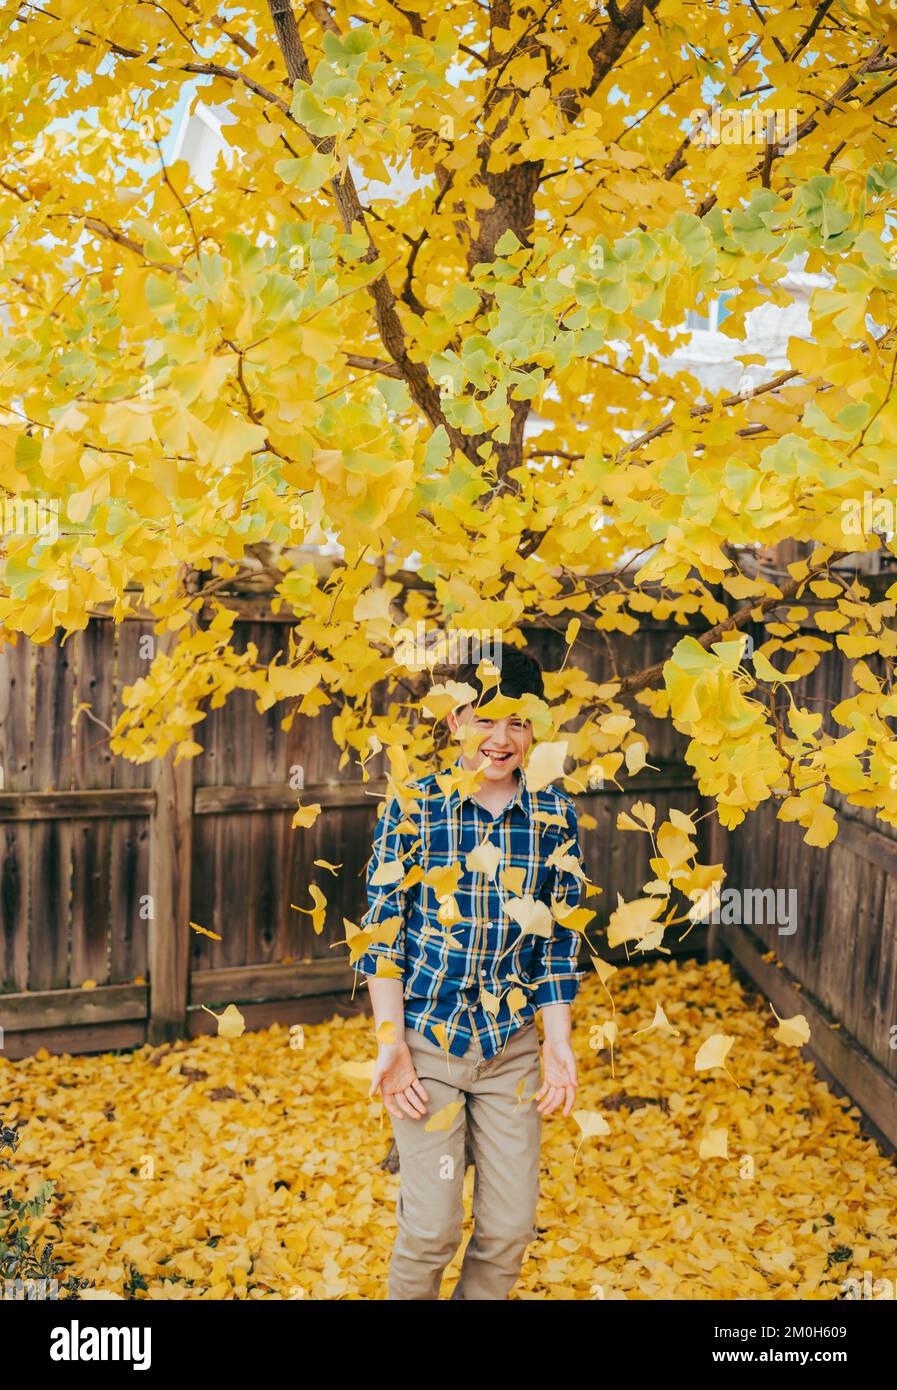 Happy boy throwing yellow gingko leaves in the air on fall day. Stock Photo